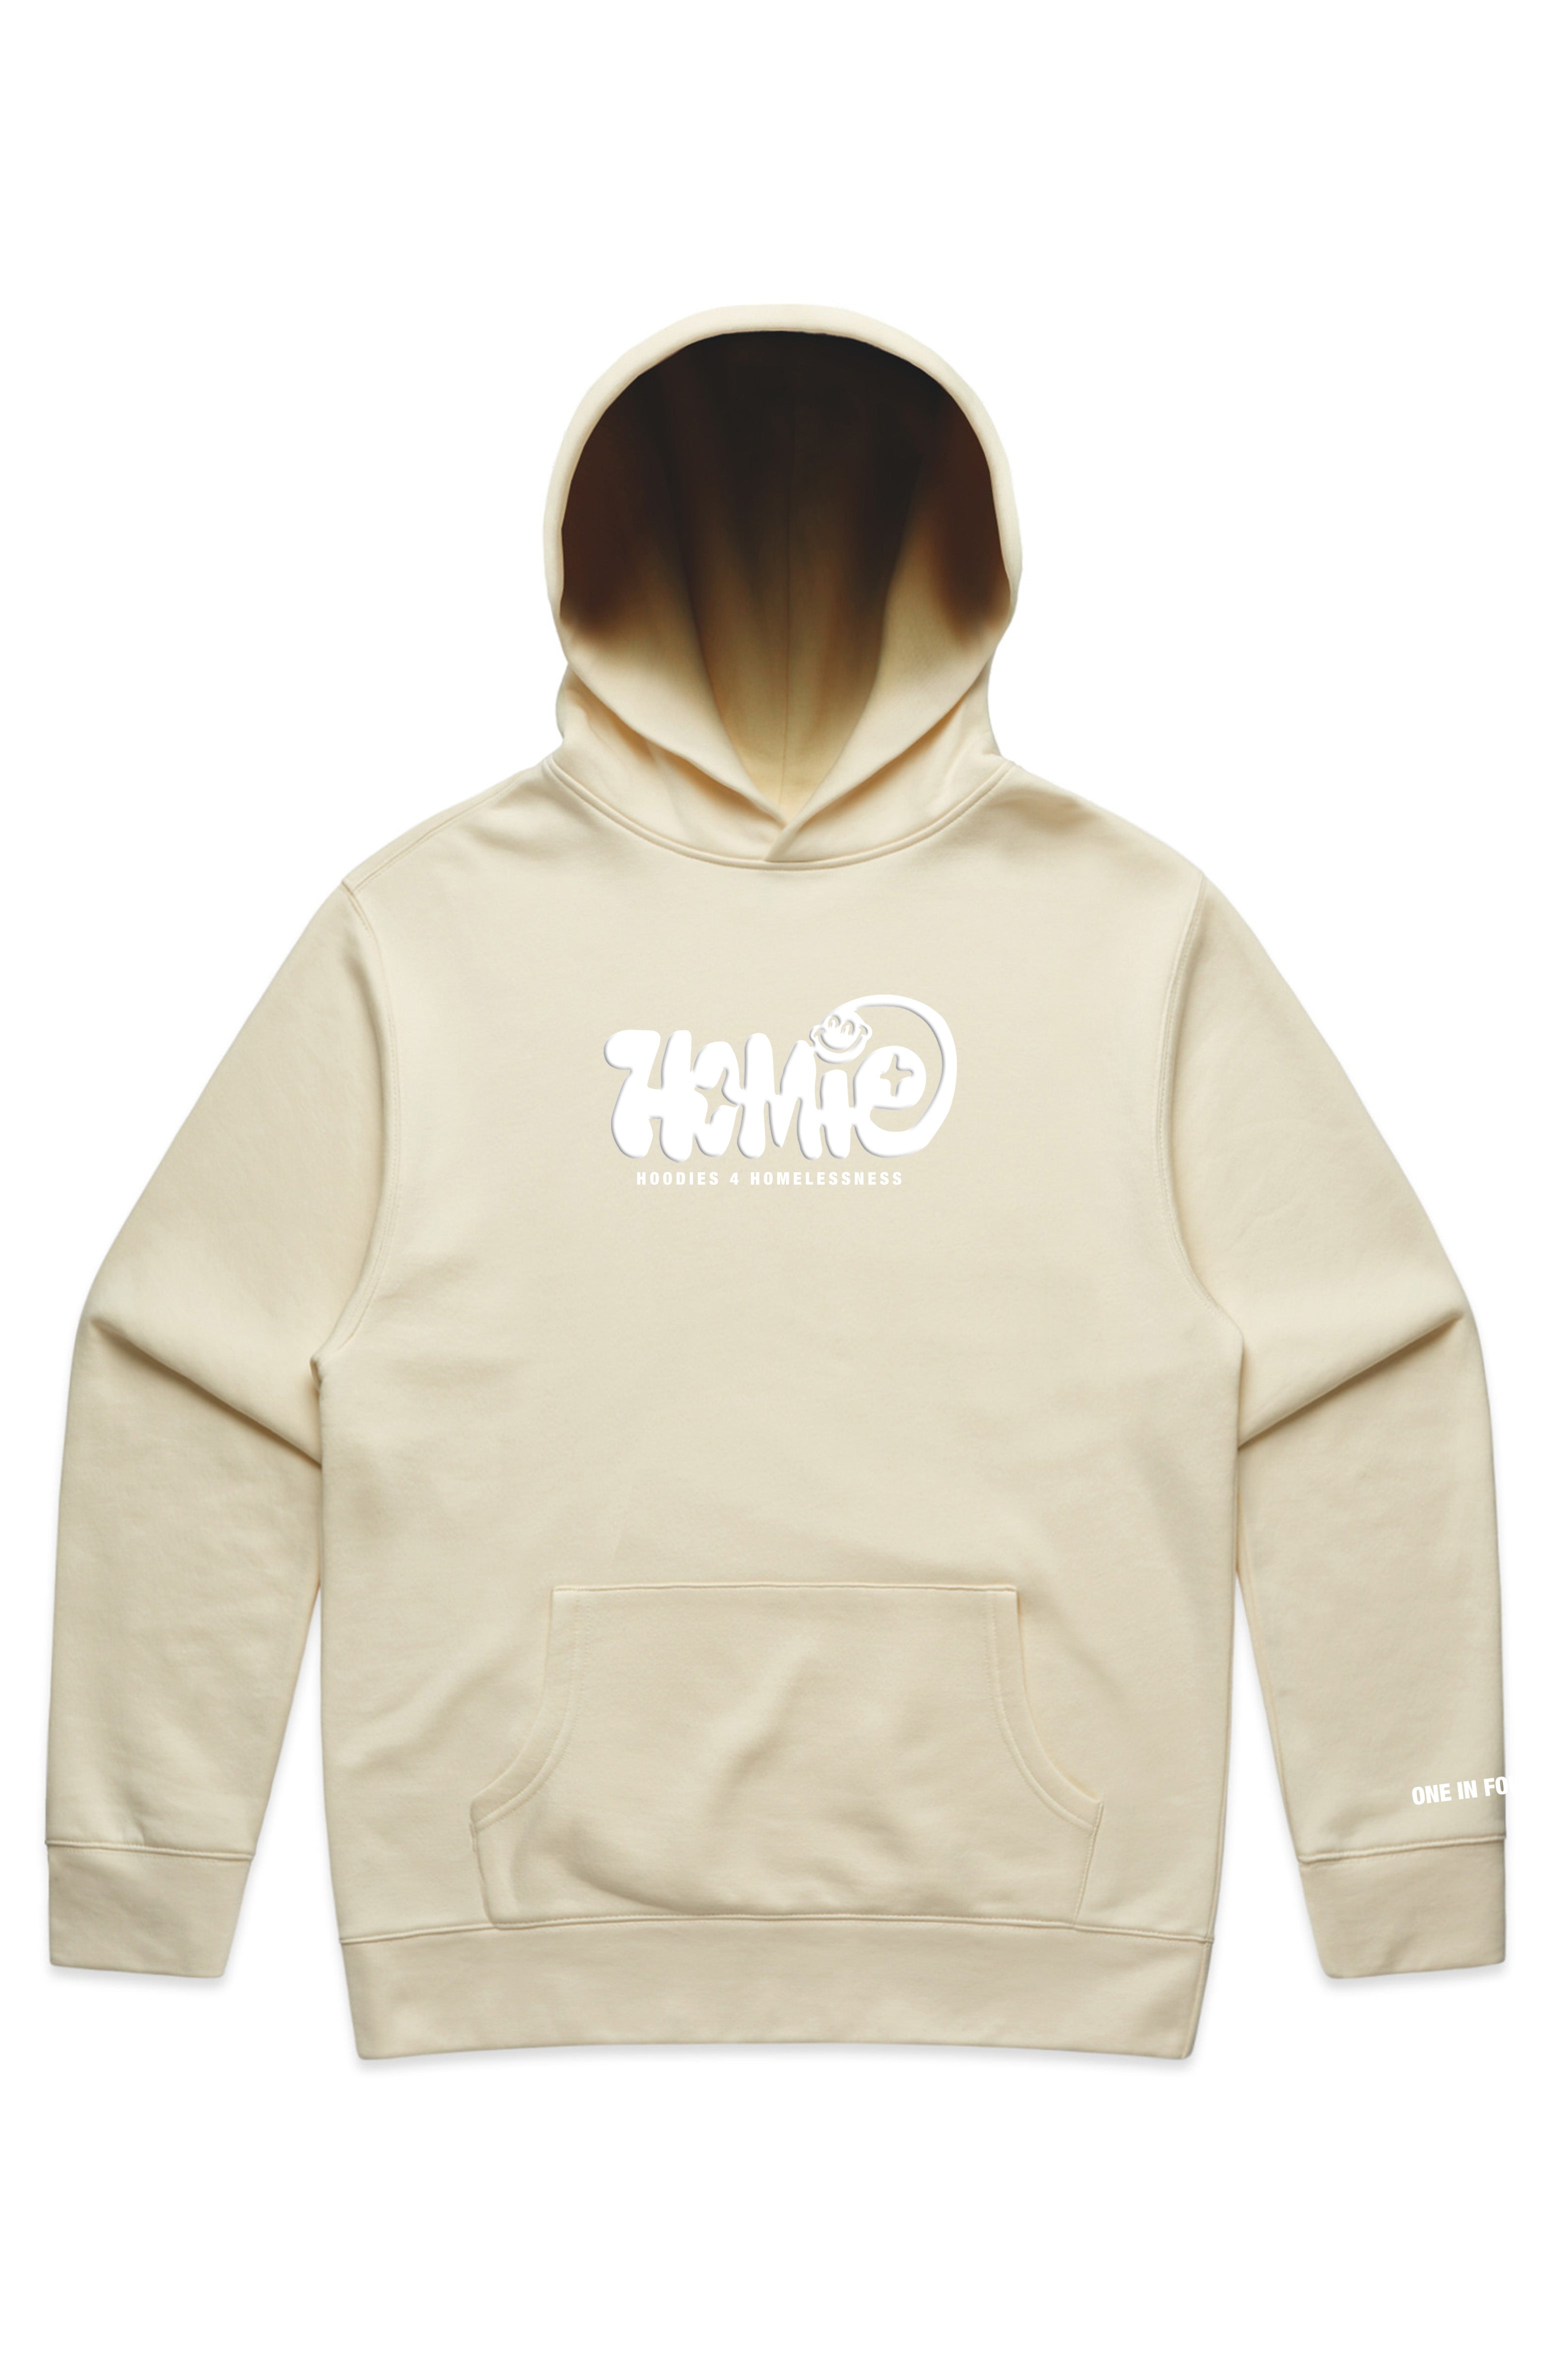 H4H Hoodie - Butter